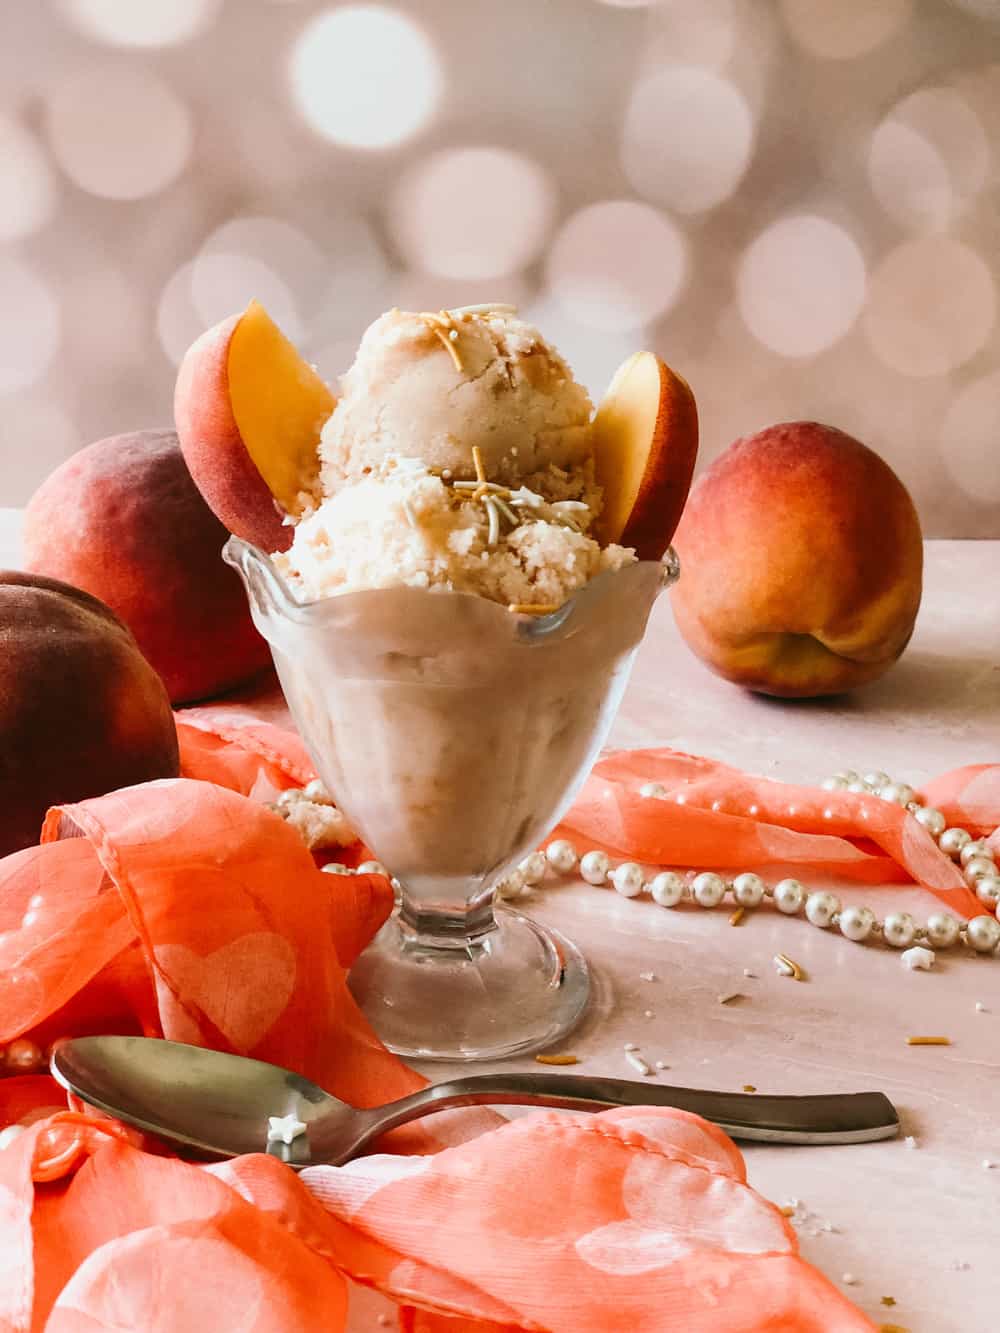 Peaches and cream ice cream in a glass dish with peaches sticking out of the top. a scarf, pearls, and spoon in the foreground. Peaches in the background.